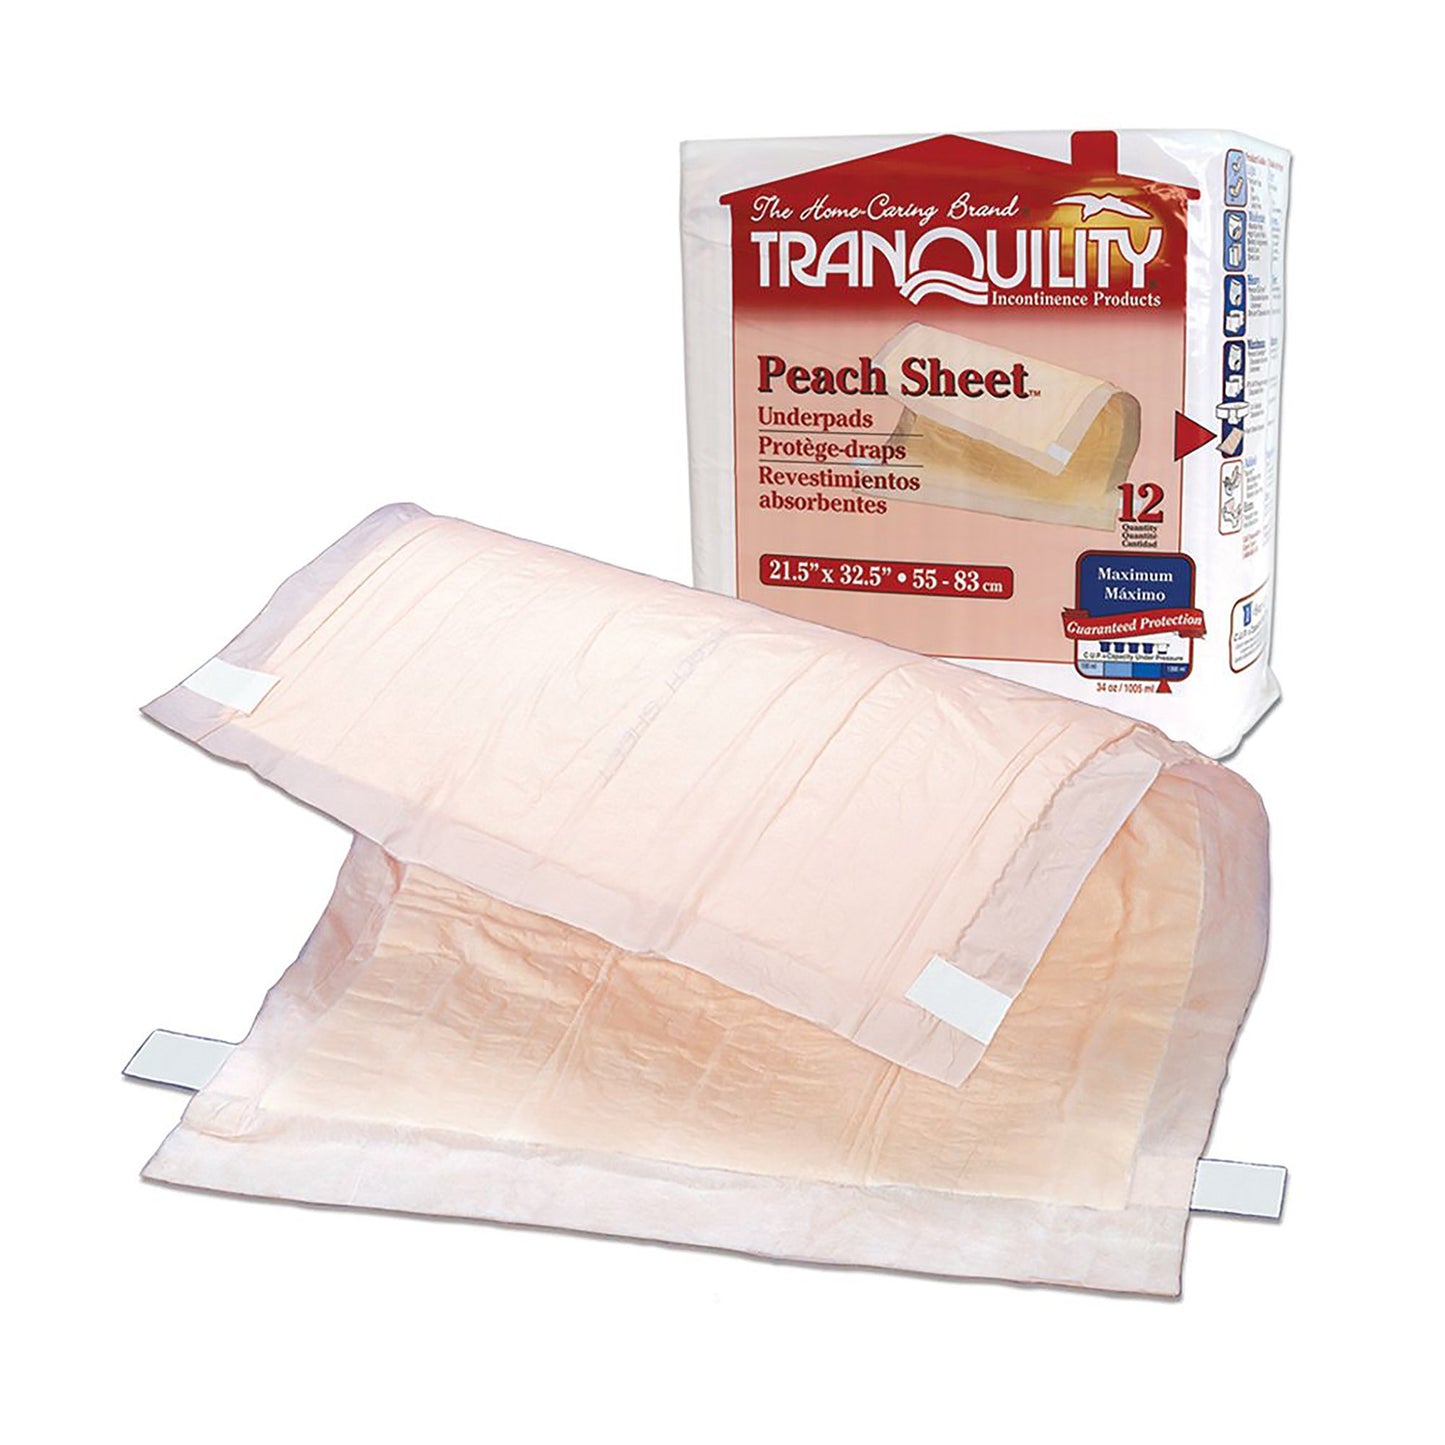 Tranquility® Peach Sheet Underpad, 21.5 x 32.5 Inch, 12 ct